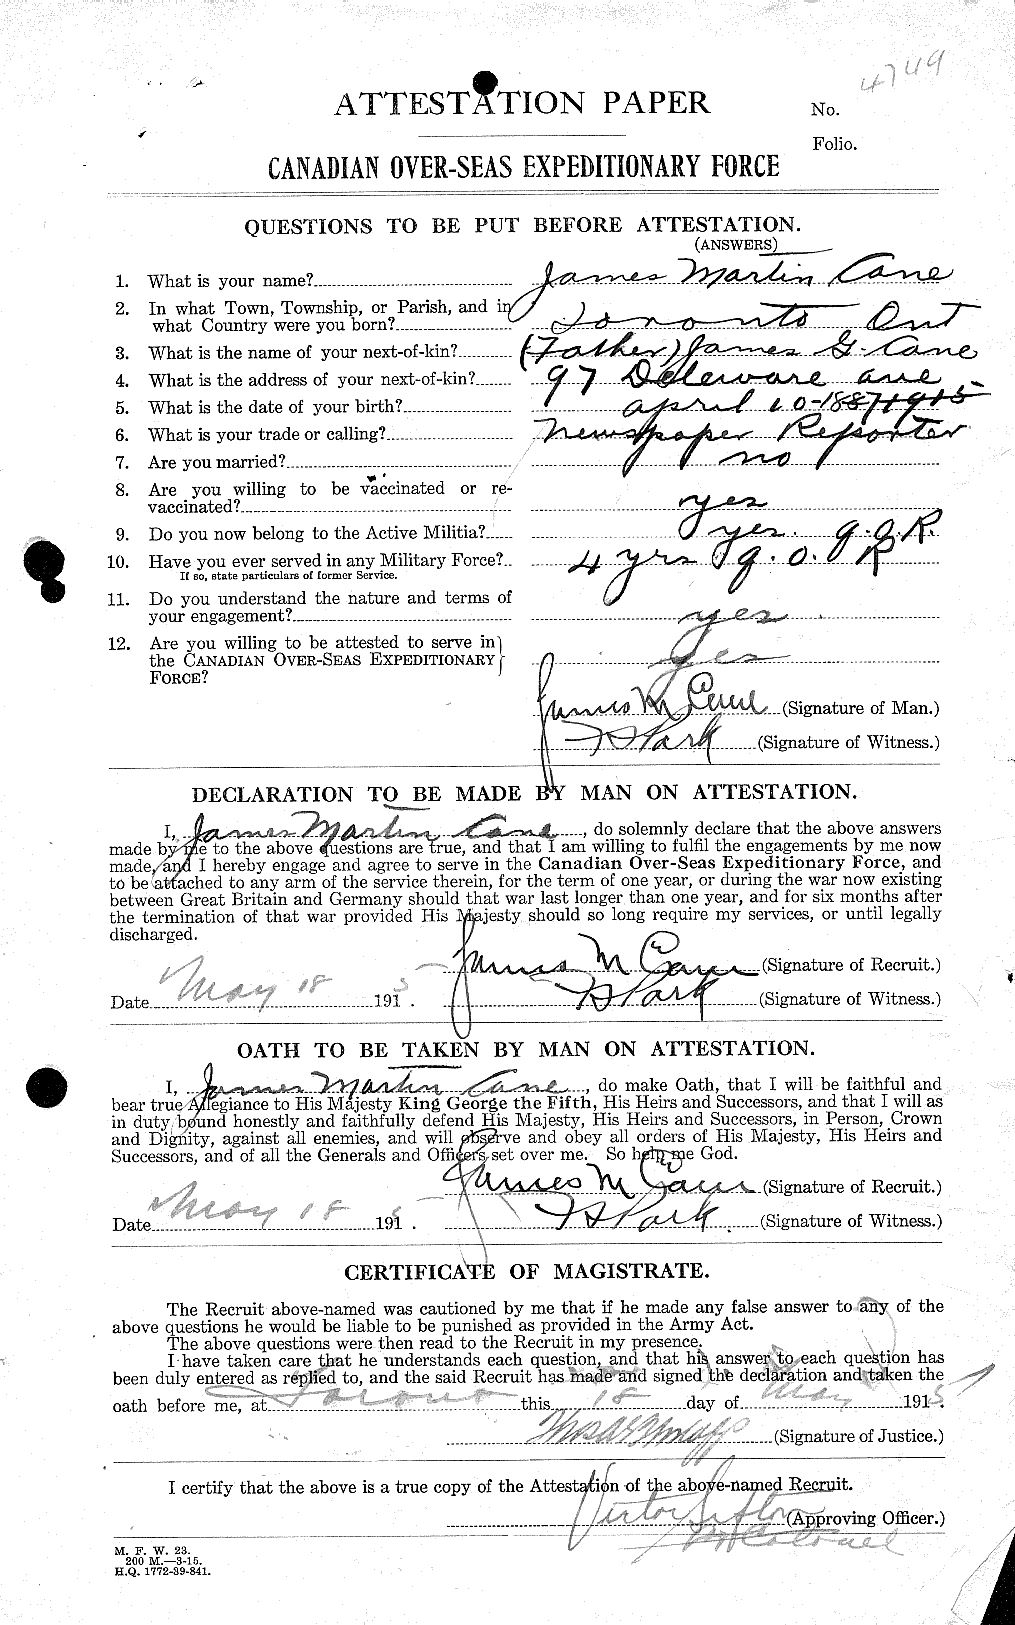 Personnel Records of the First World War - CEF 002814c